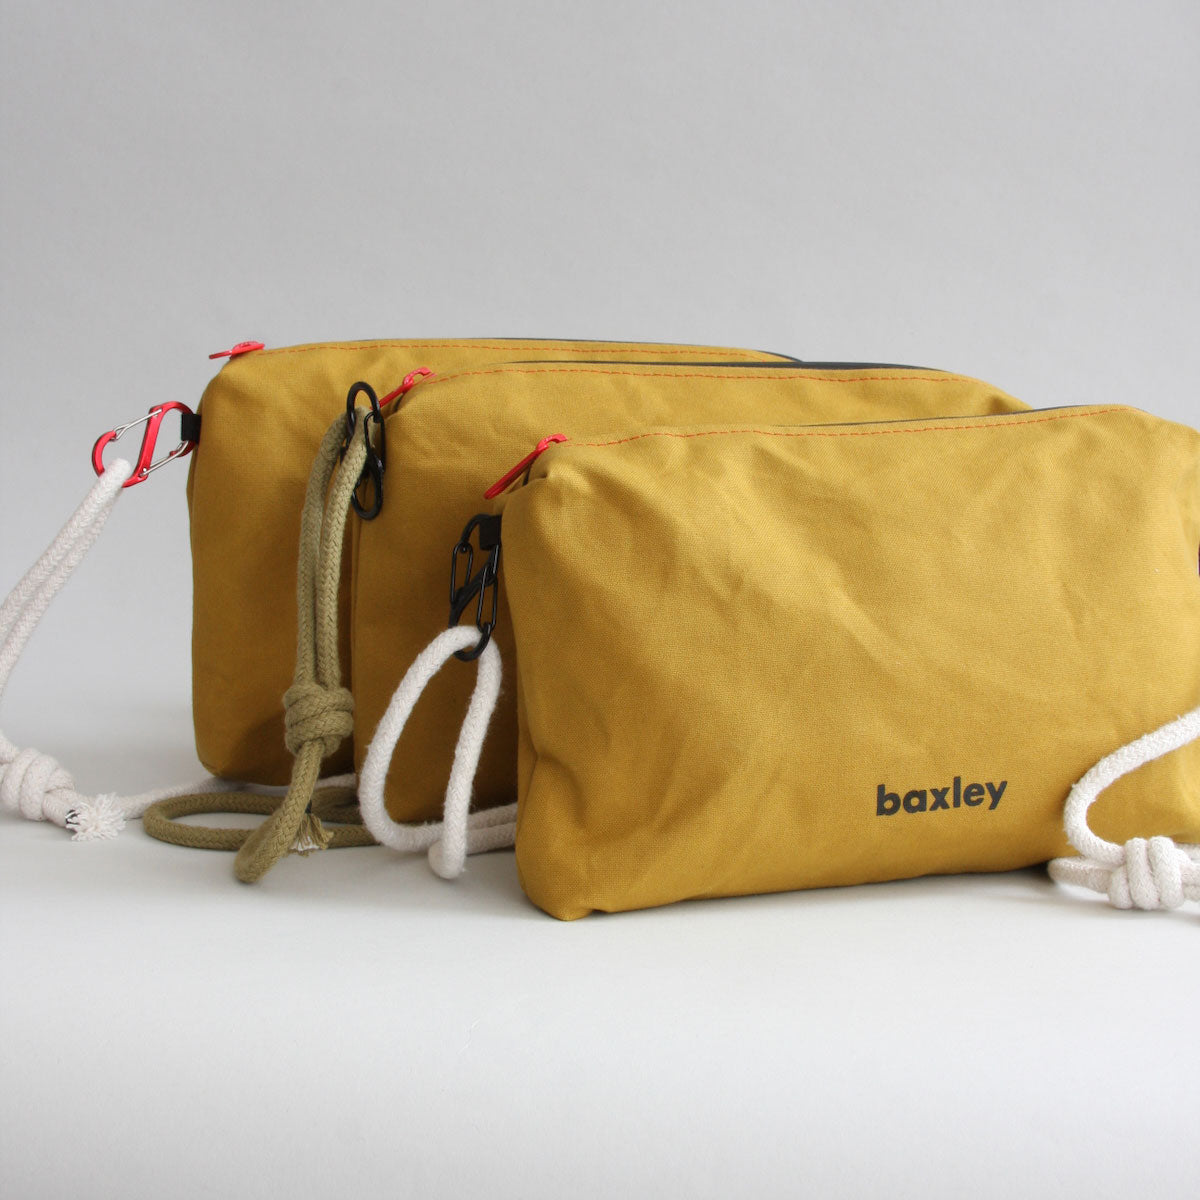 Baxley's Effie crossbody pouch shown with three variations. All canvas is cumin, two ropes are white, one rope is green. Two of the carbiners are black, one is red. The zip sliders are all red.